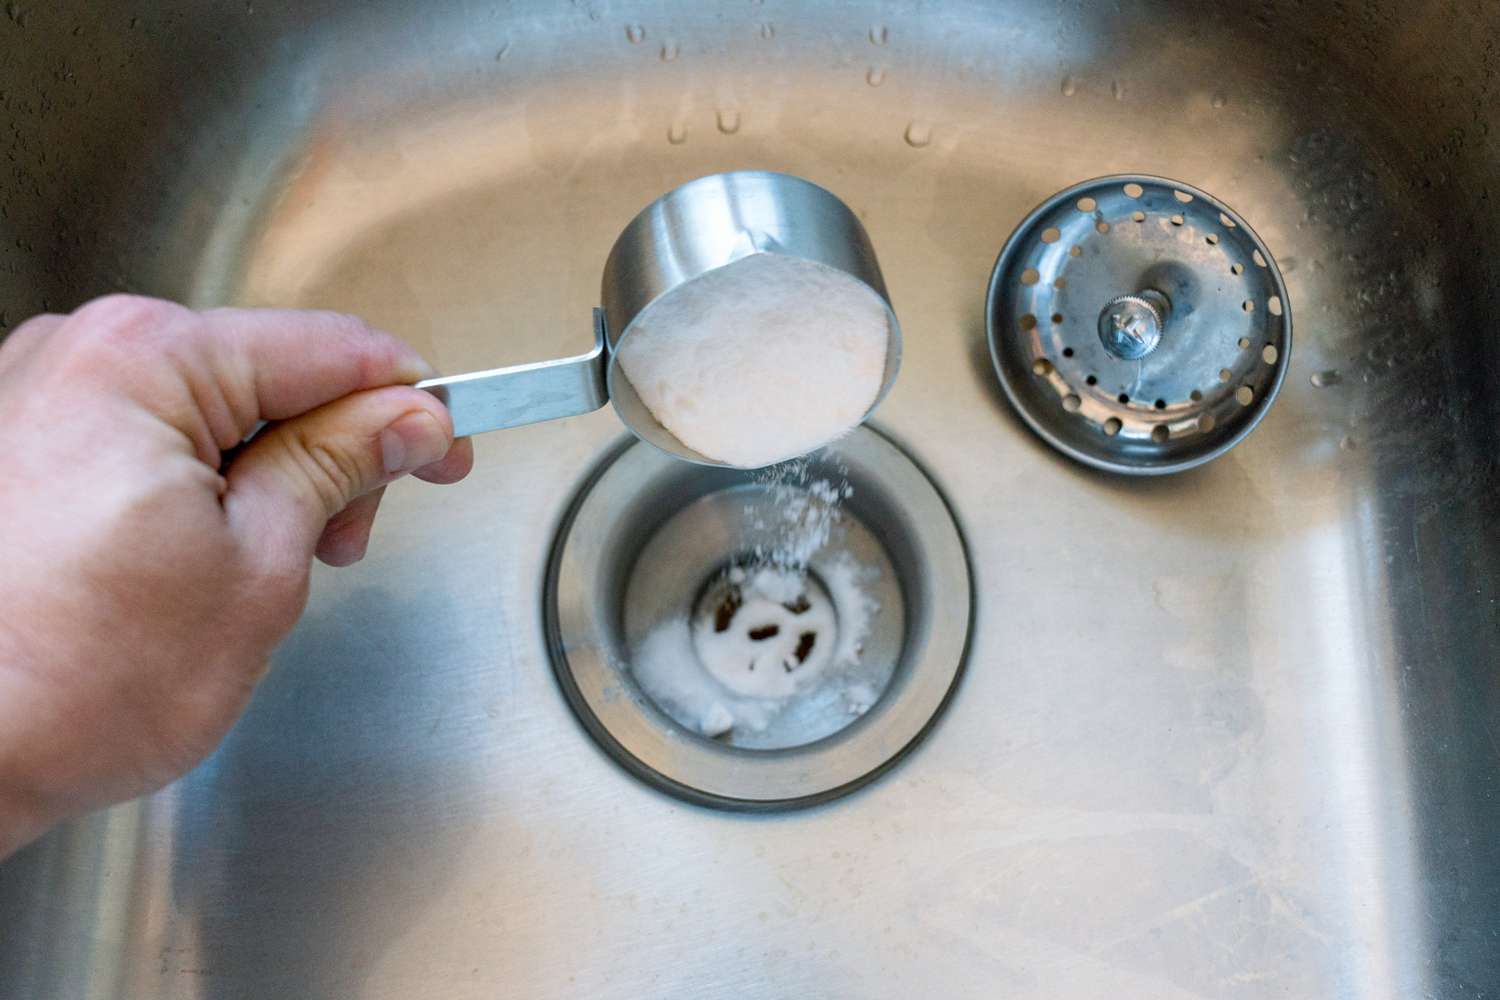 Cup of baking soda poued down stinky kitchen drain